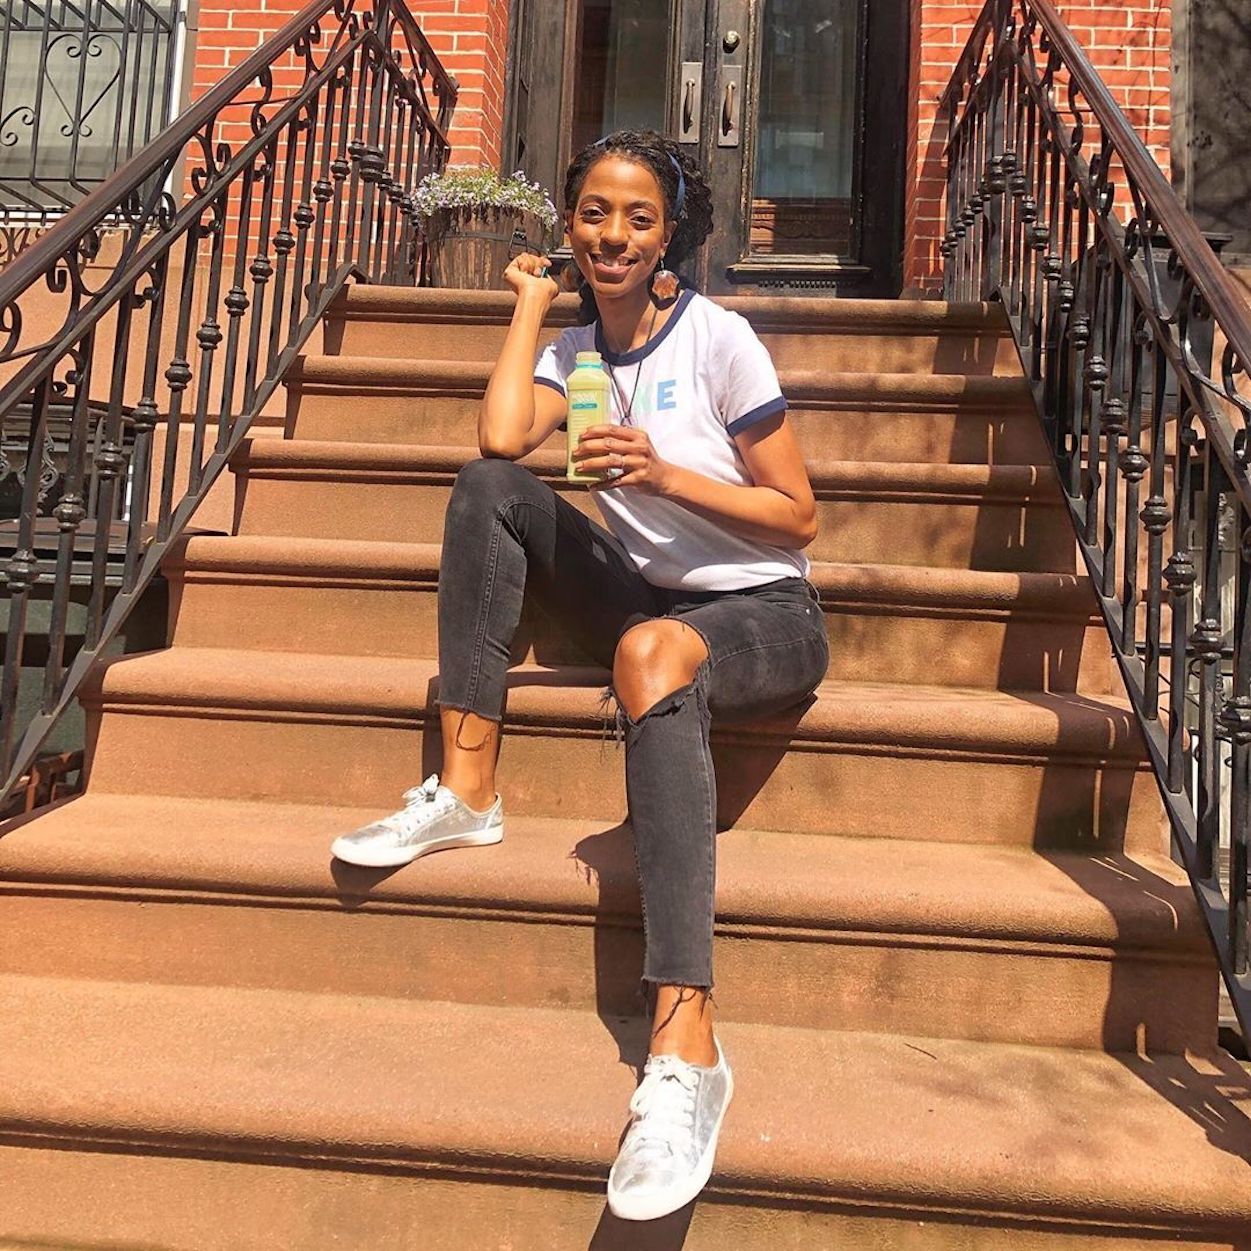 The social media personality A Brooklyn Babe sitting on the stoop of a Brownstone row house, holding a Splendid Spoon smoothie. She is sitting a a slight angle, with her feet on two different stairs.